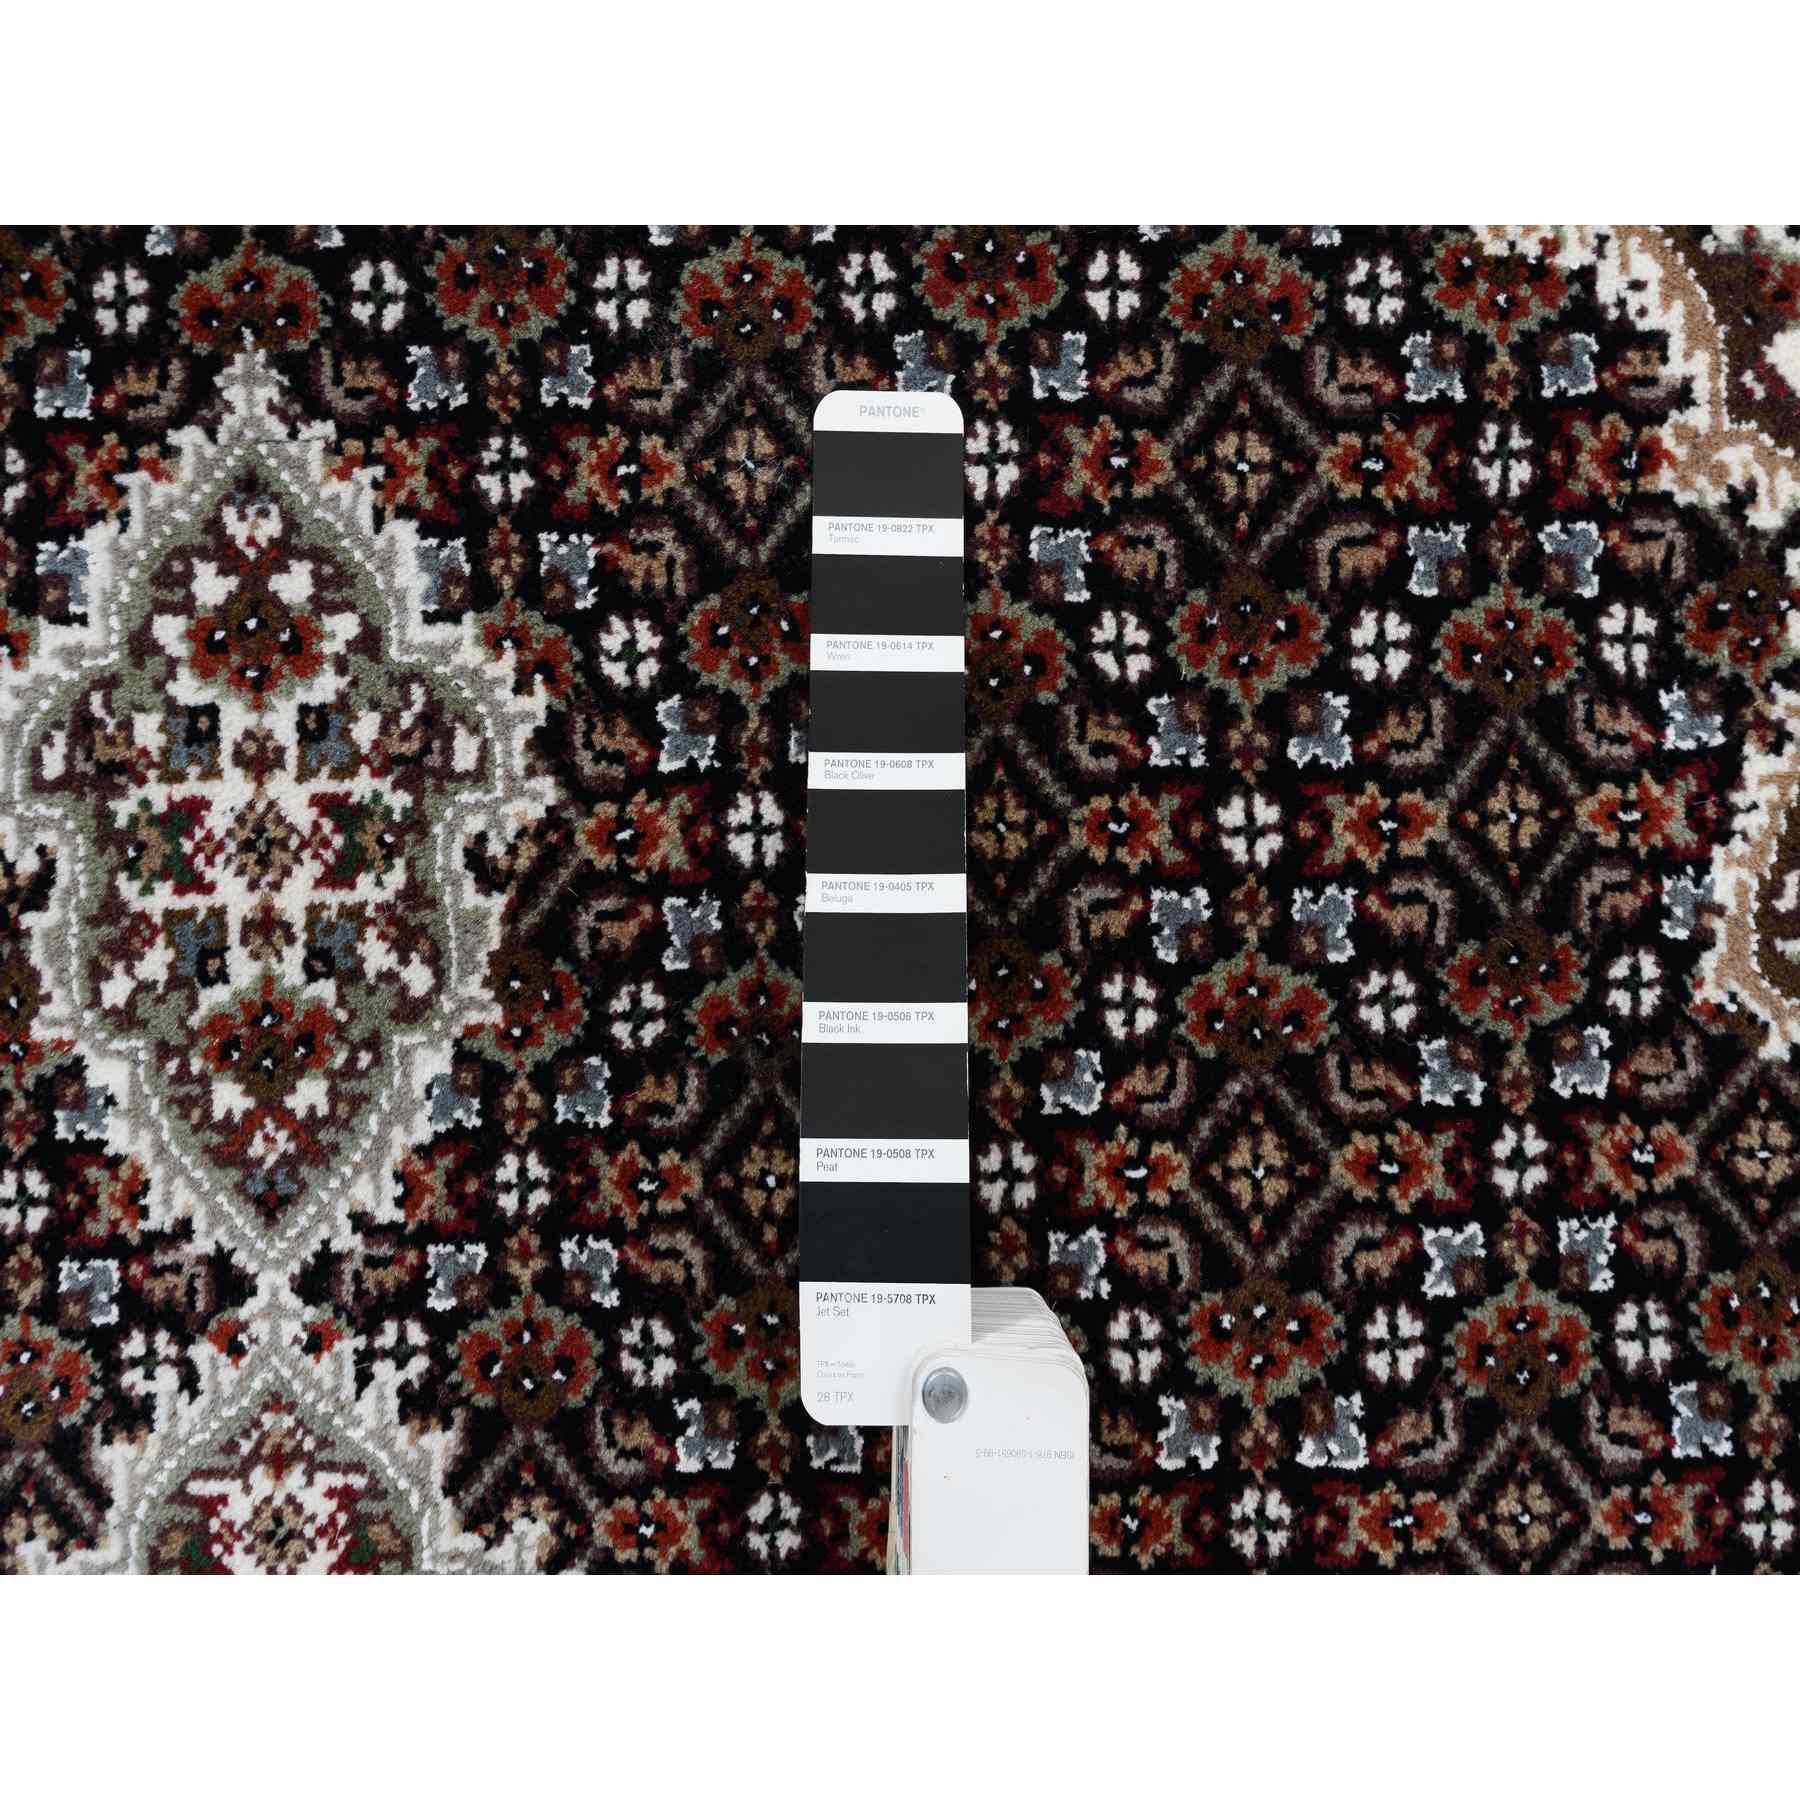 Fine-Oriental-Hand-Knotted-Rug-317680